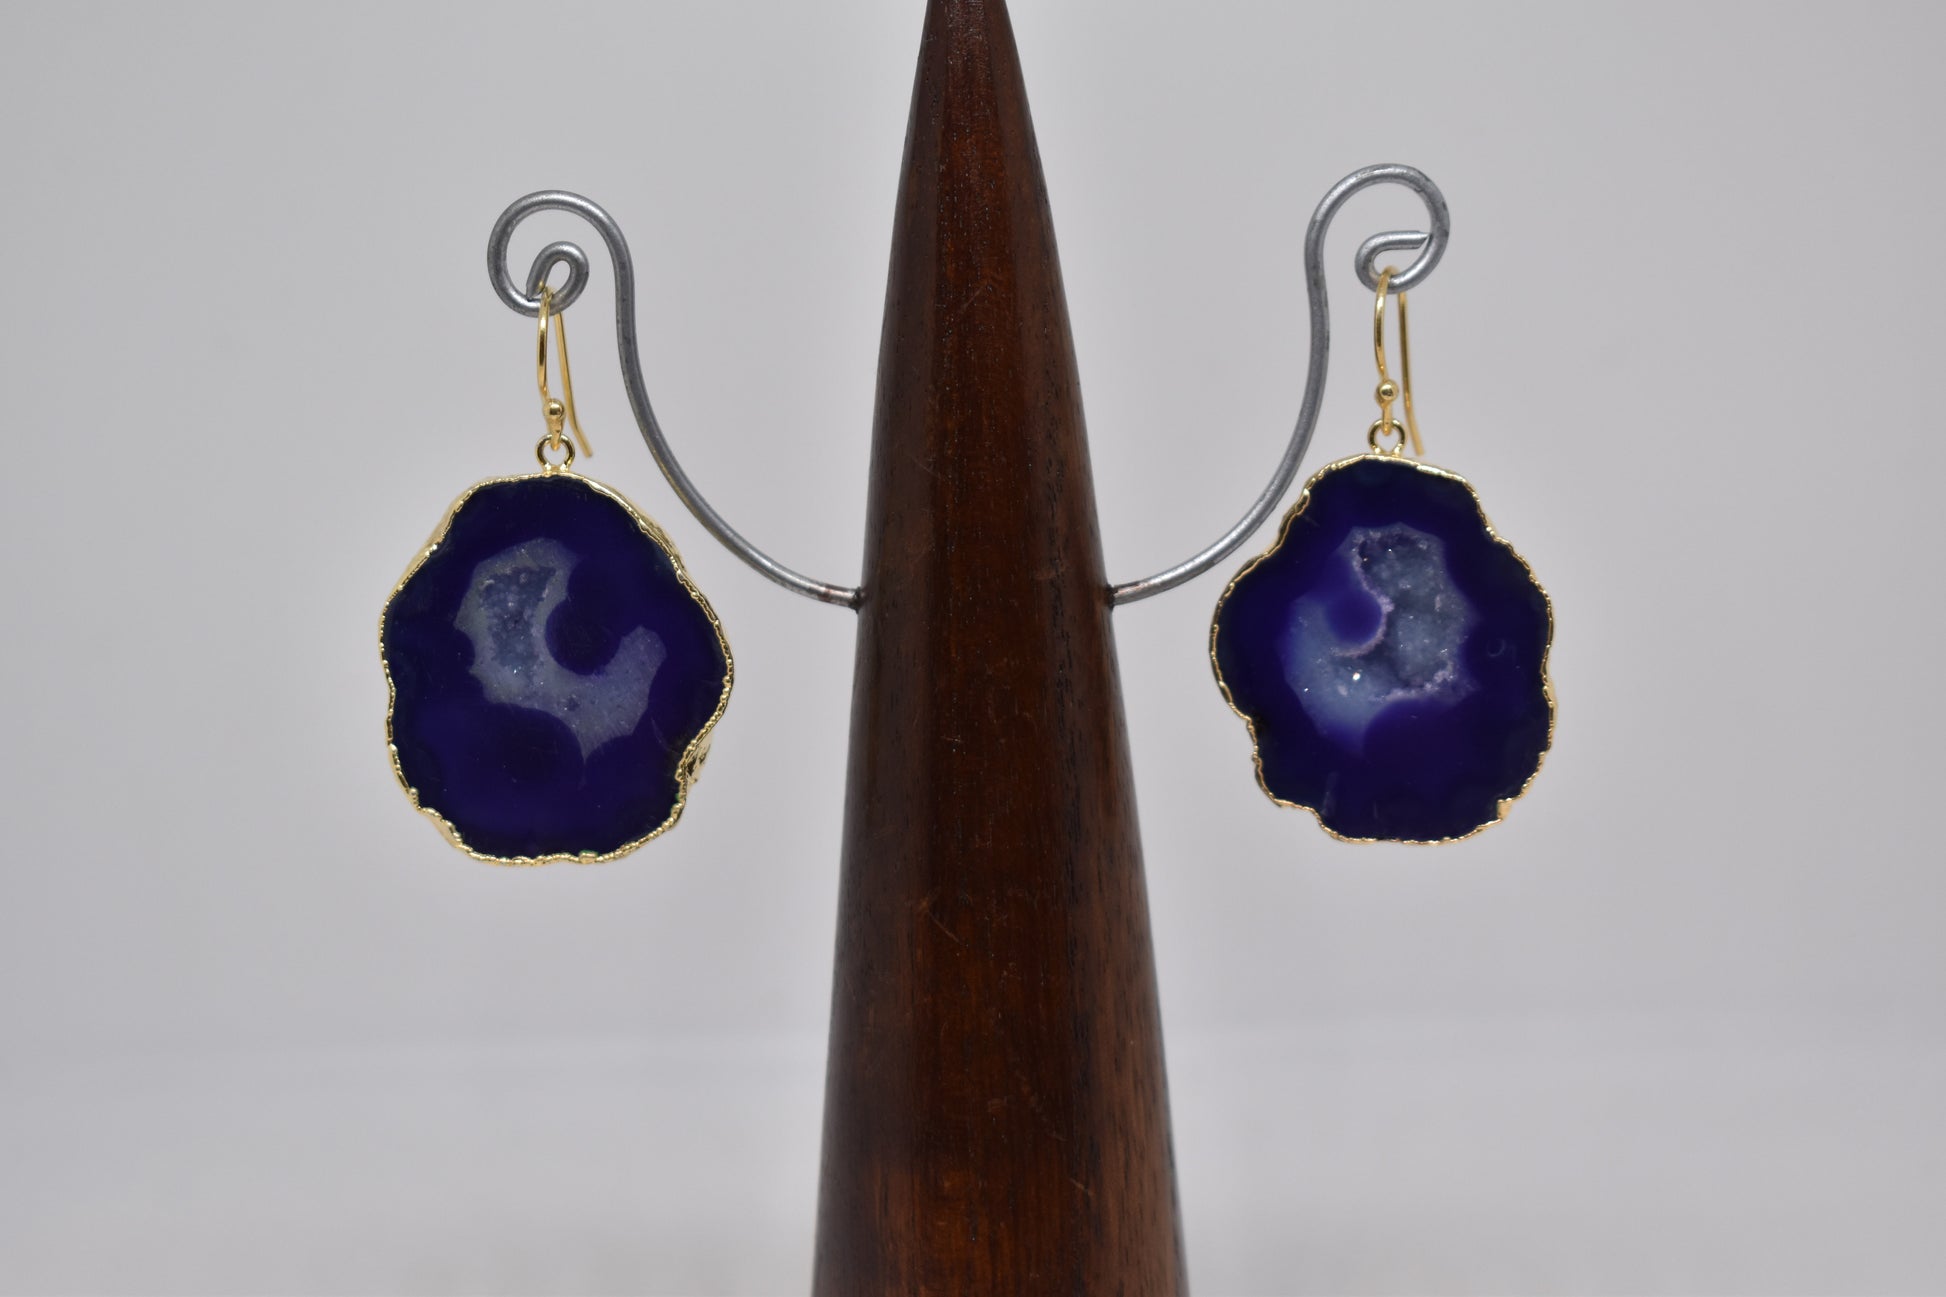 Geode Druzy Earrings available in a variety of fabulous colours - Violet Elizabeth